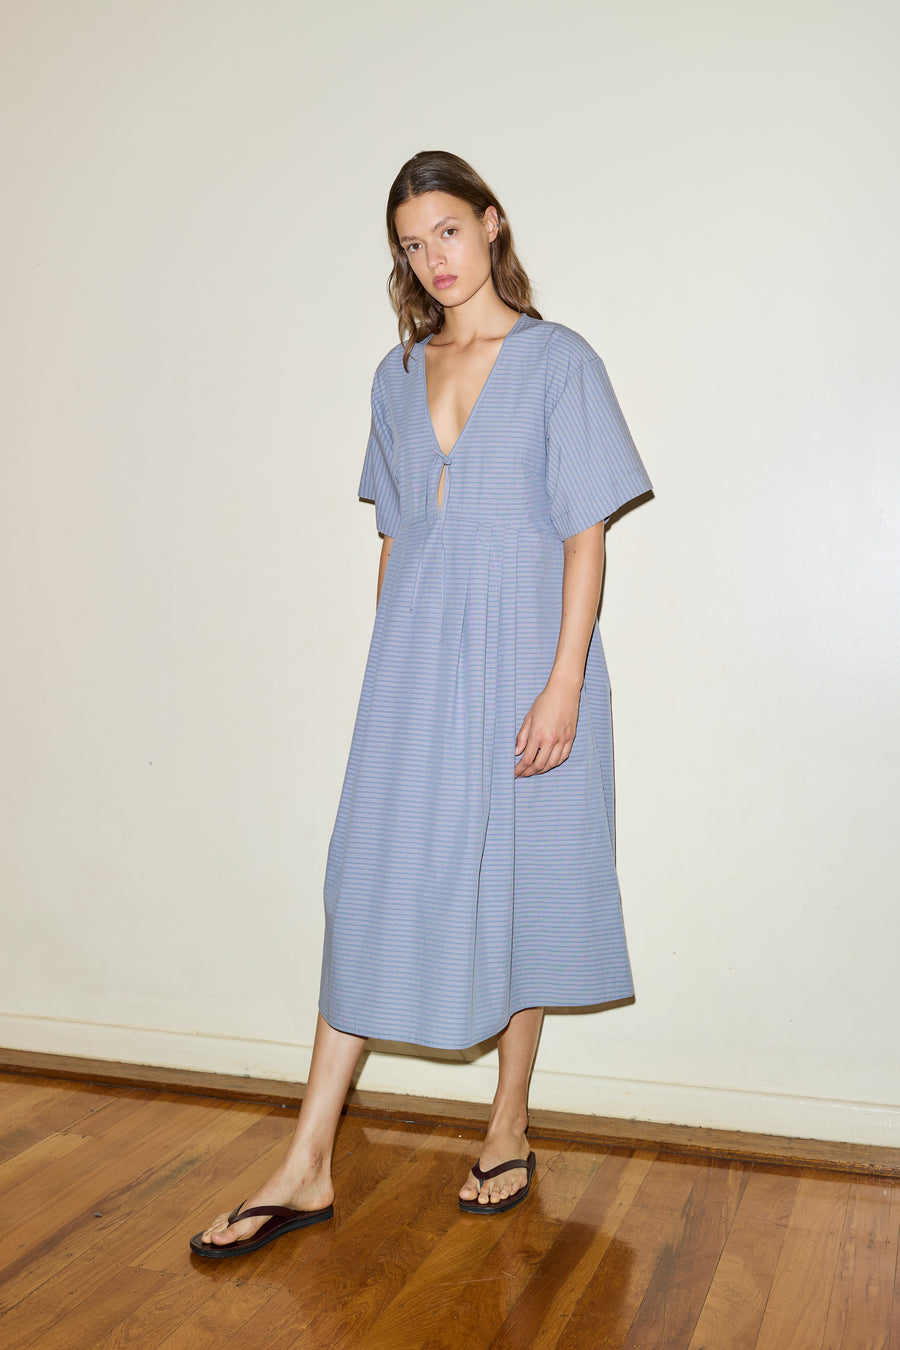 The Square Sleeve Dress - Pillow Check